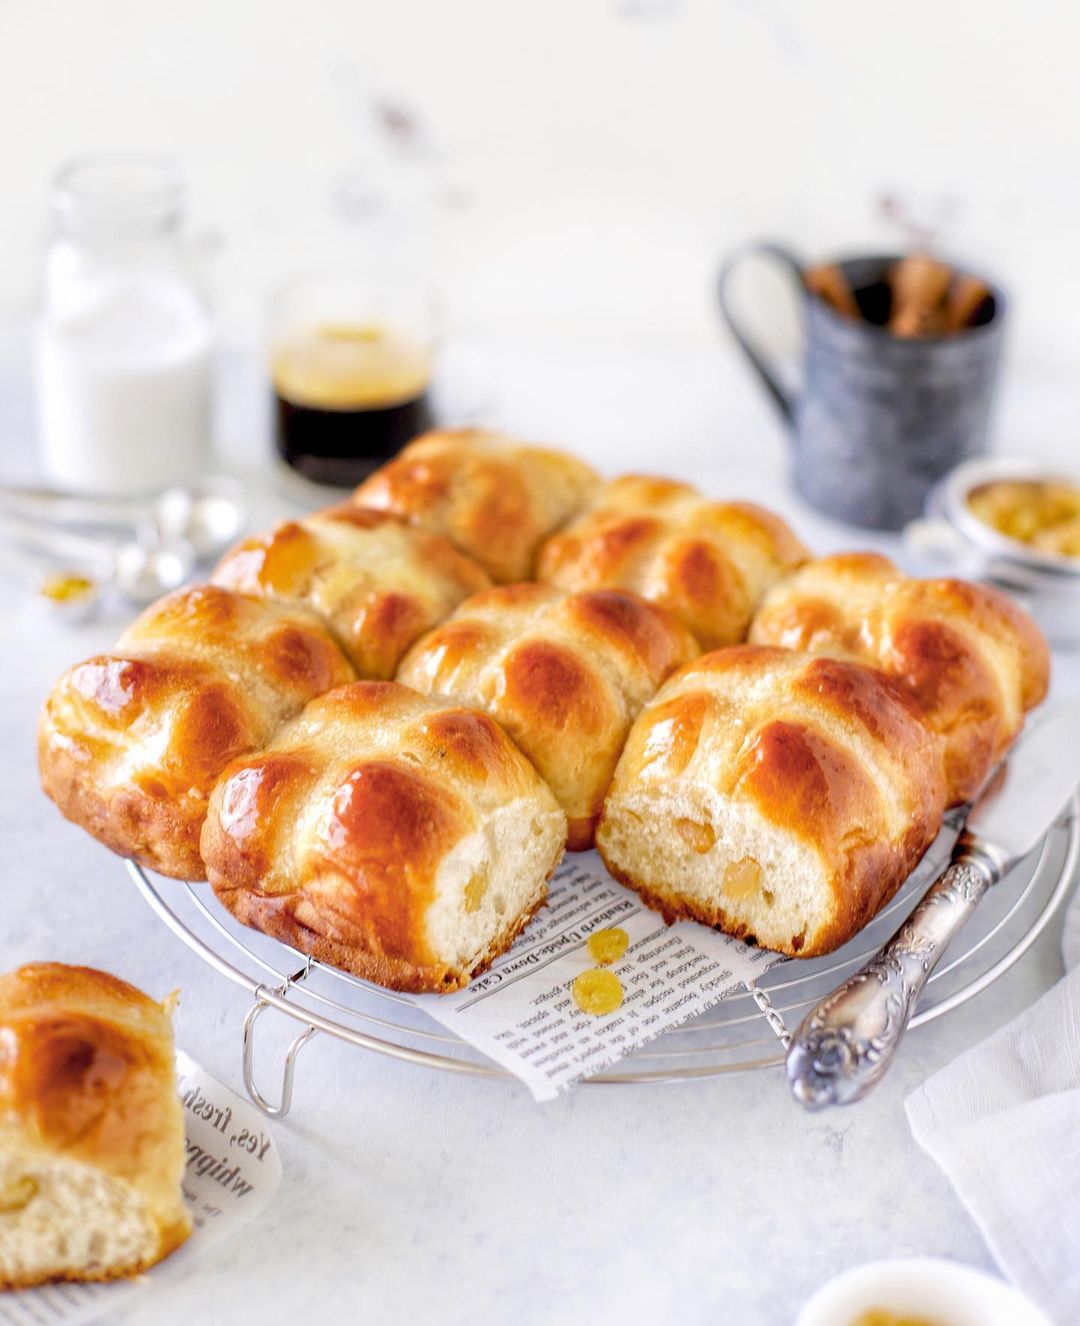 Easter Extravagance: Spiced Hot Cross Buns